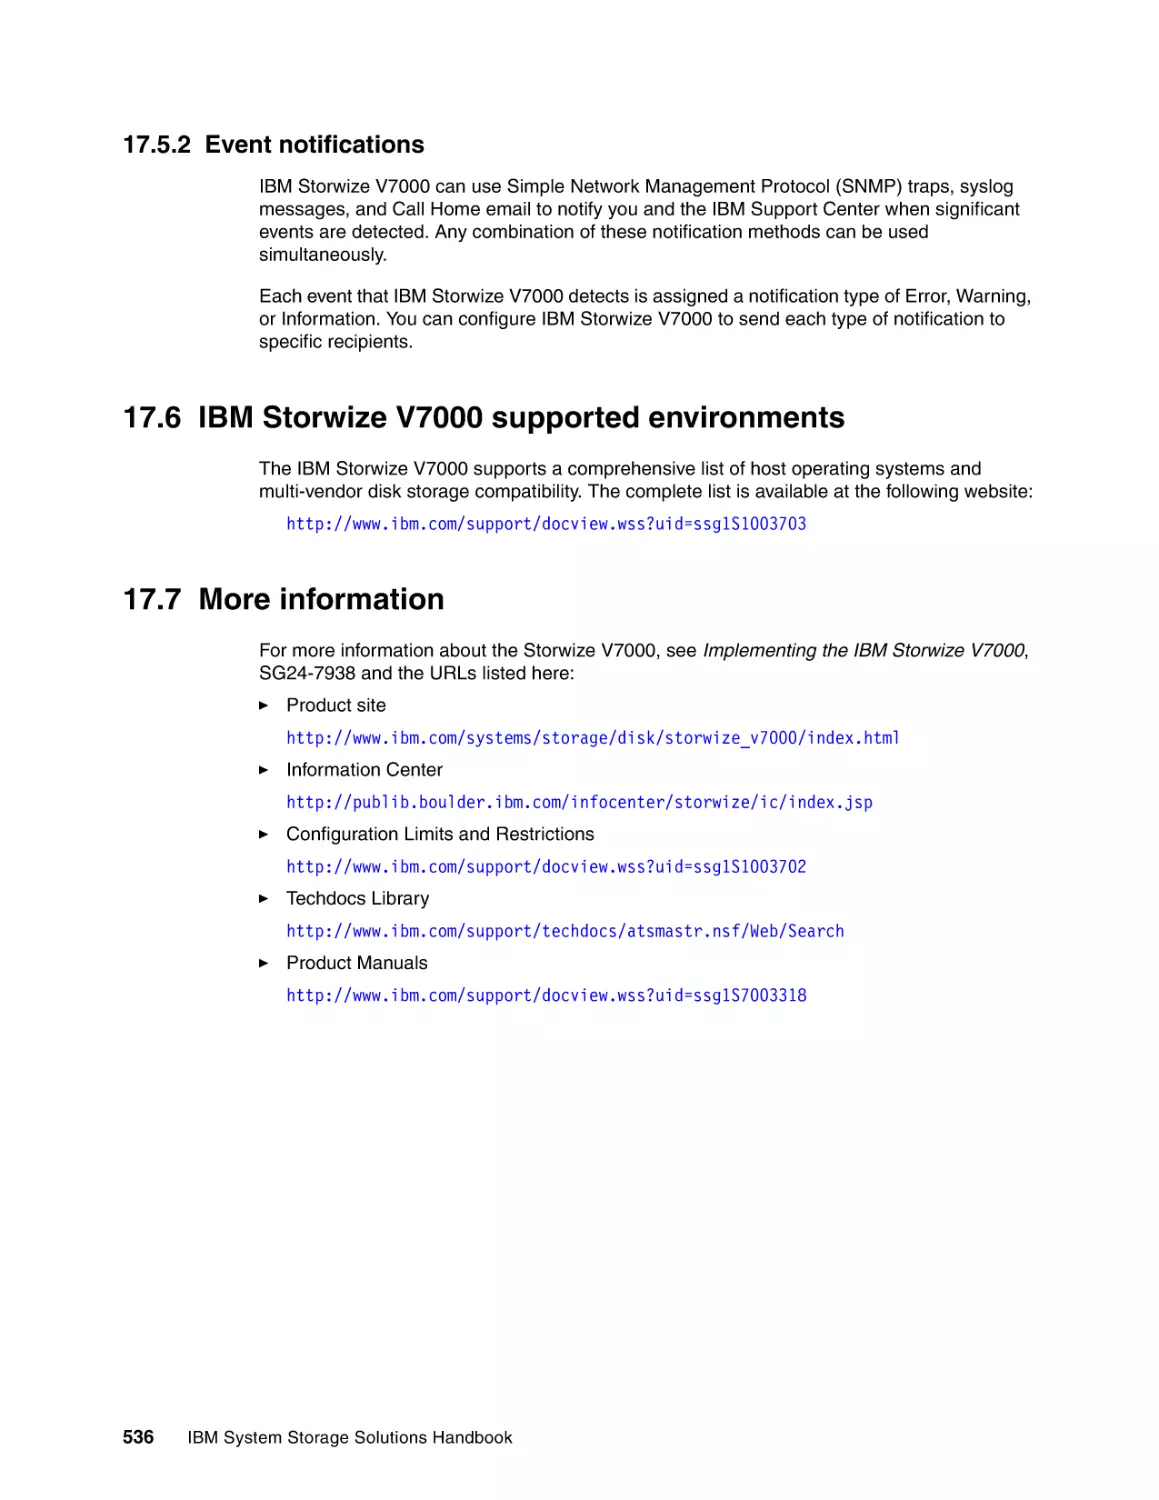 17.5.2 Event notifications
17.6 IBM Storwize V7000 supported environments
17.7 More information